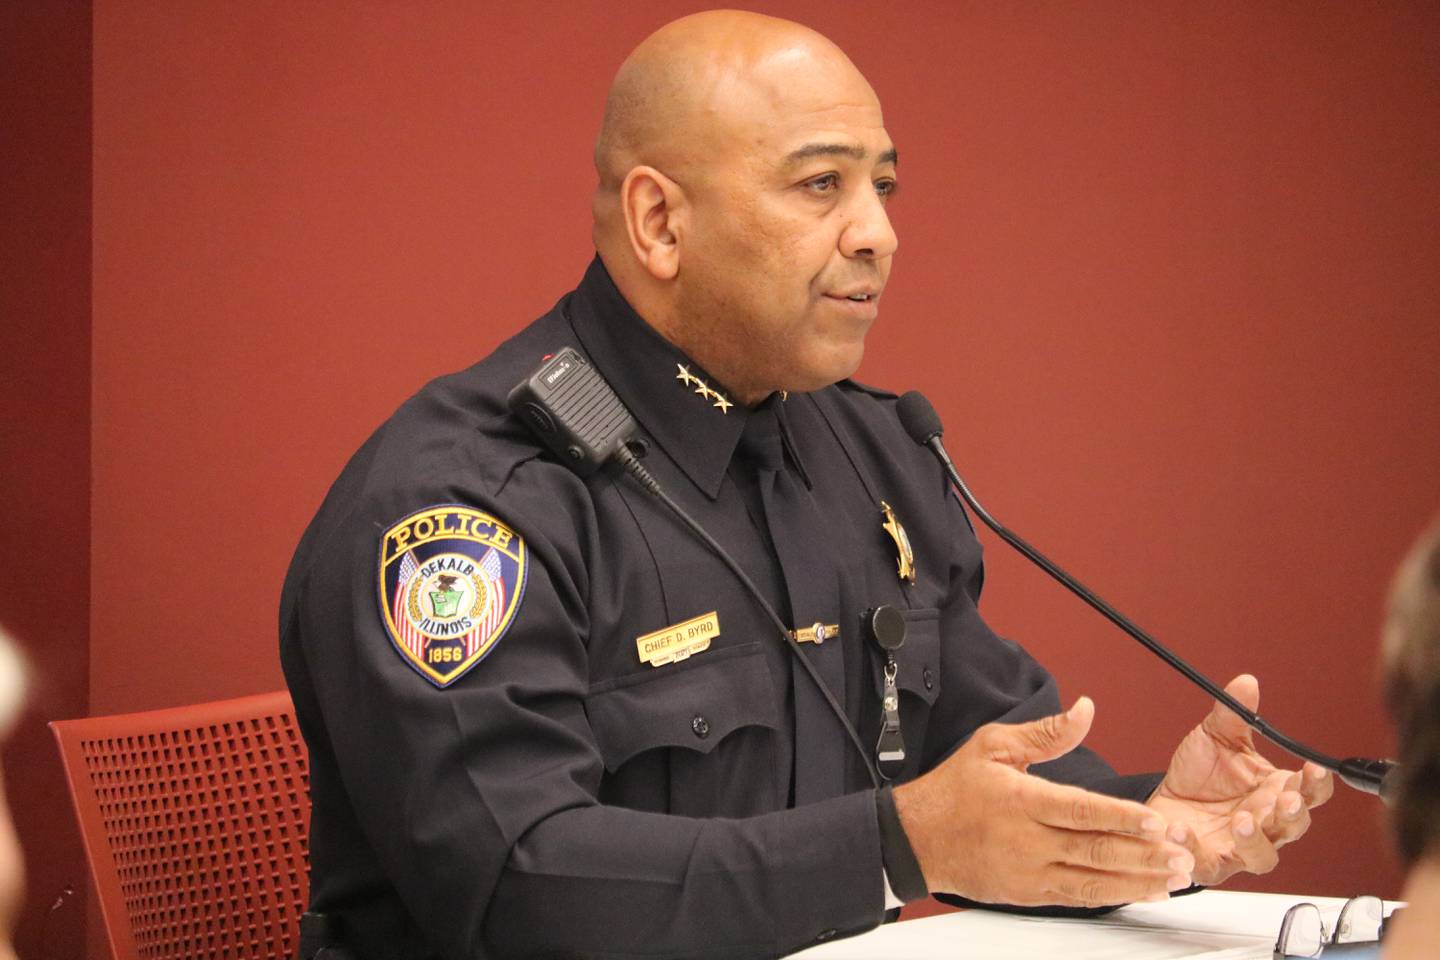 Police Chief David Byrd gives remarks at the Monday, Sept. 26 meeting of the DeKalb City Council.